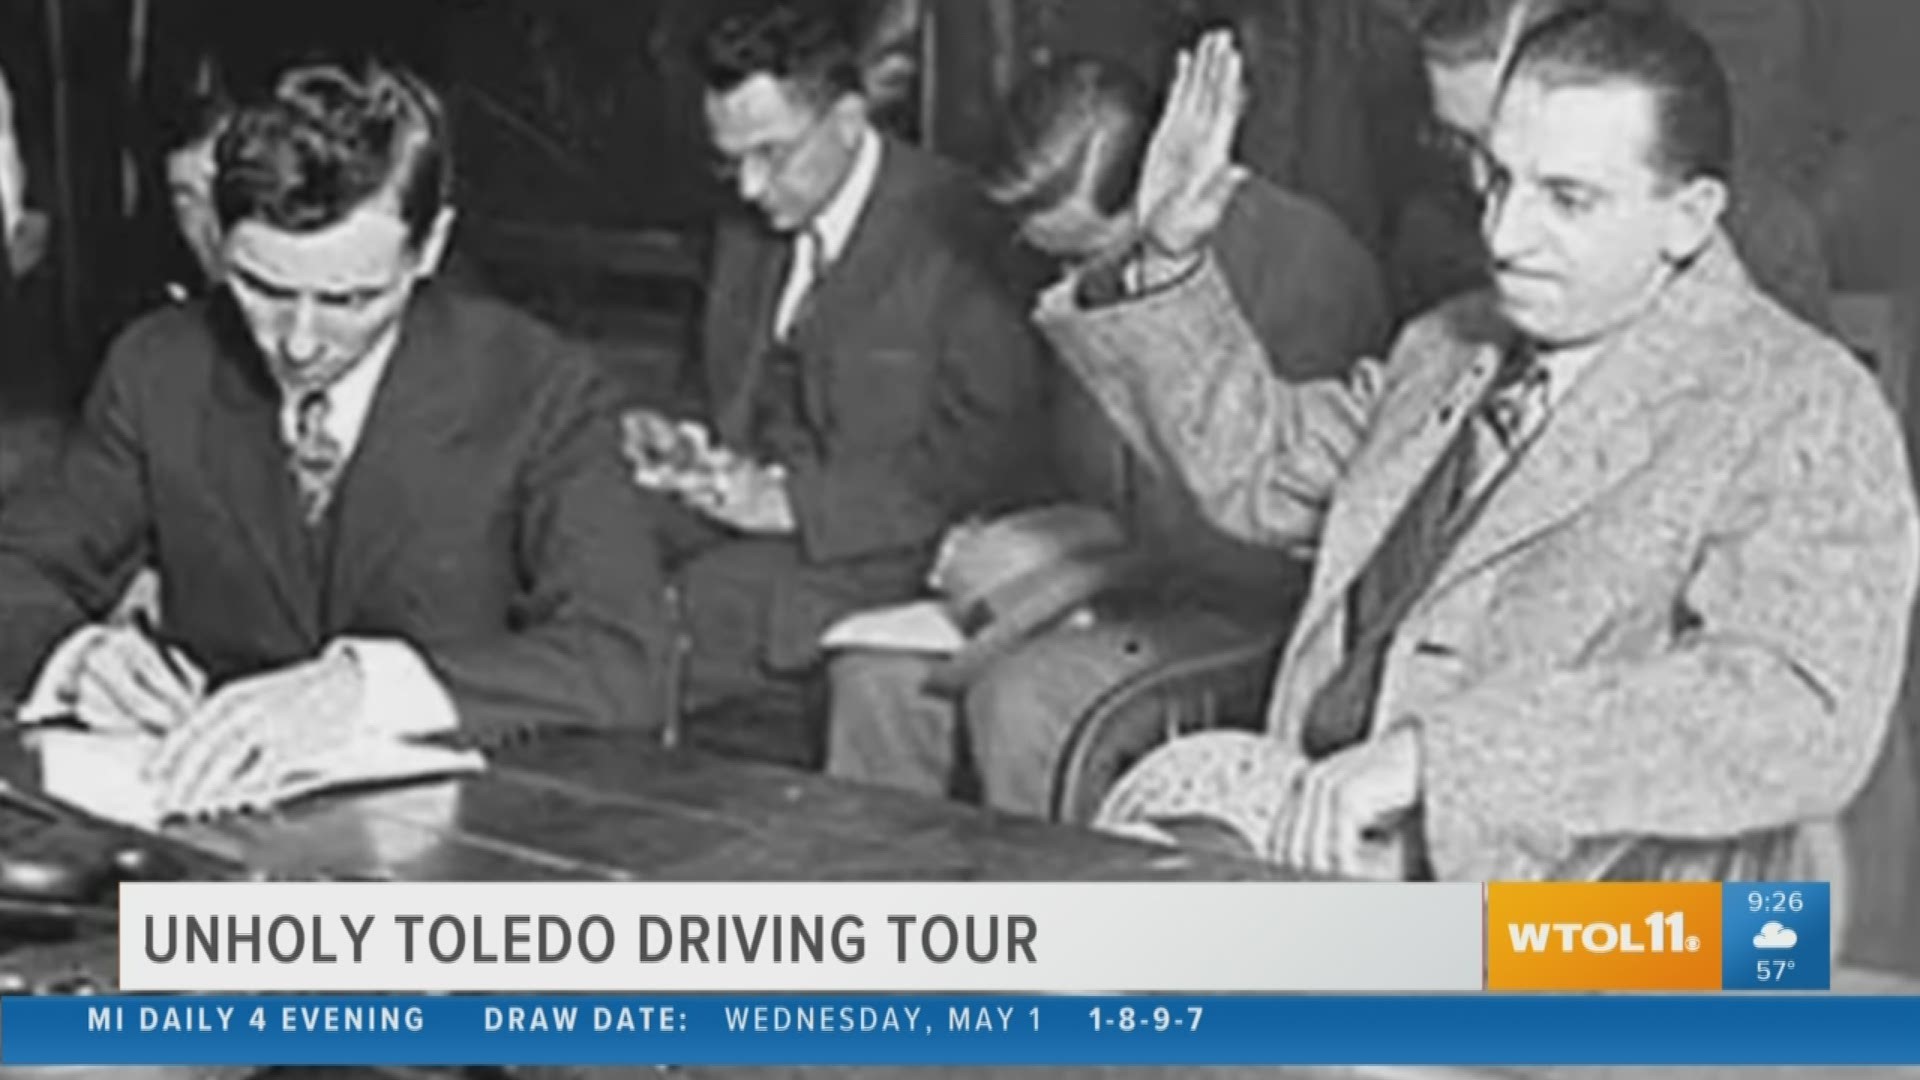 See the "unholy" side of Toledo's past with the Unholy Toledo Driving Tour!